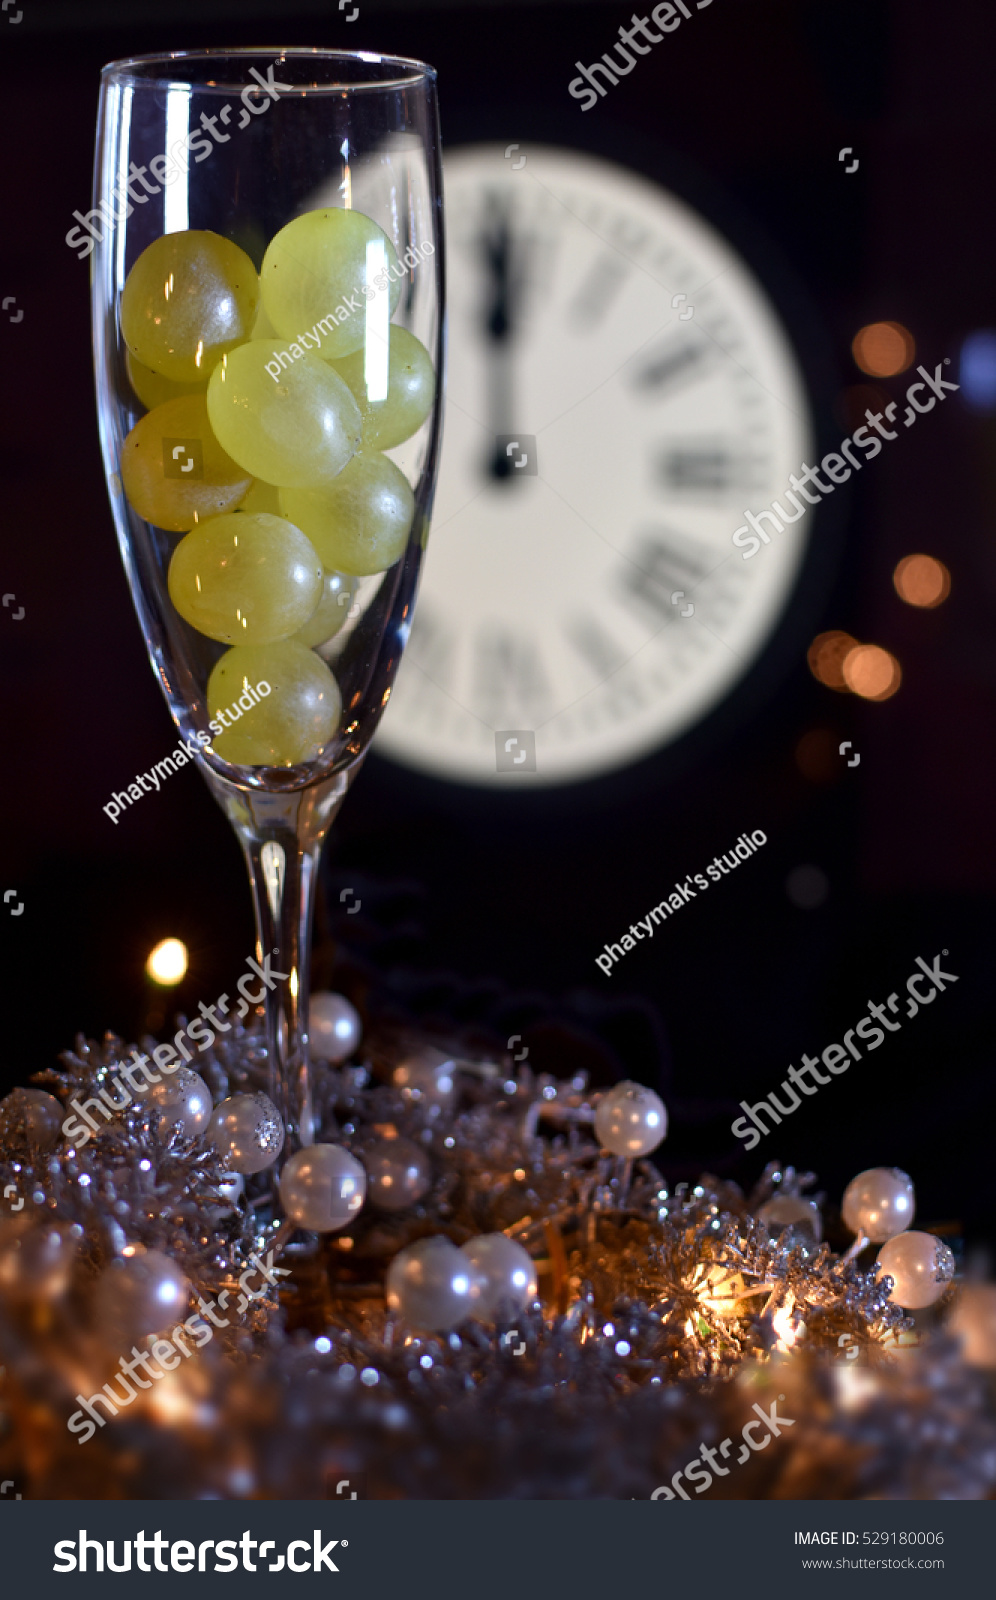 Celebration Of The New Year, Tradition Of Twelve Grapes Of Luck With ...